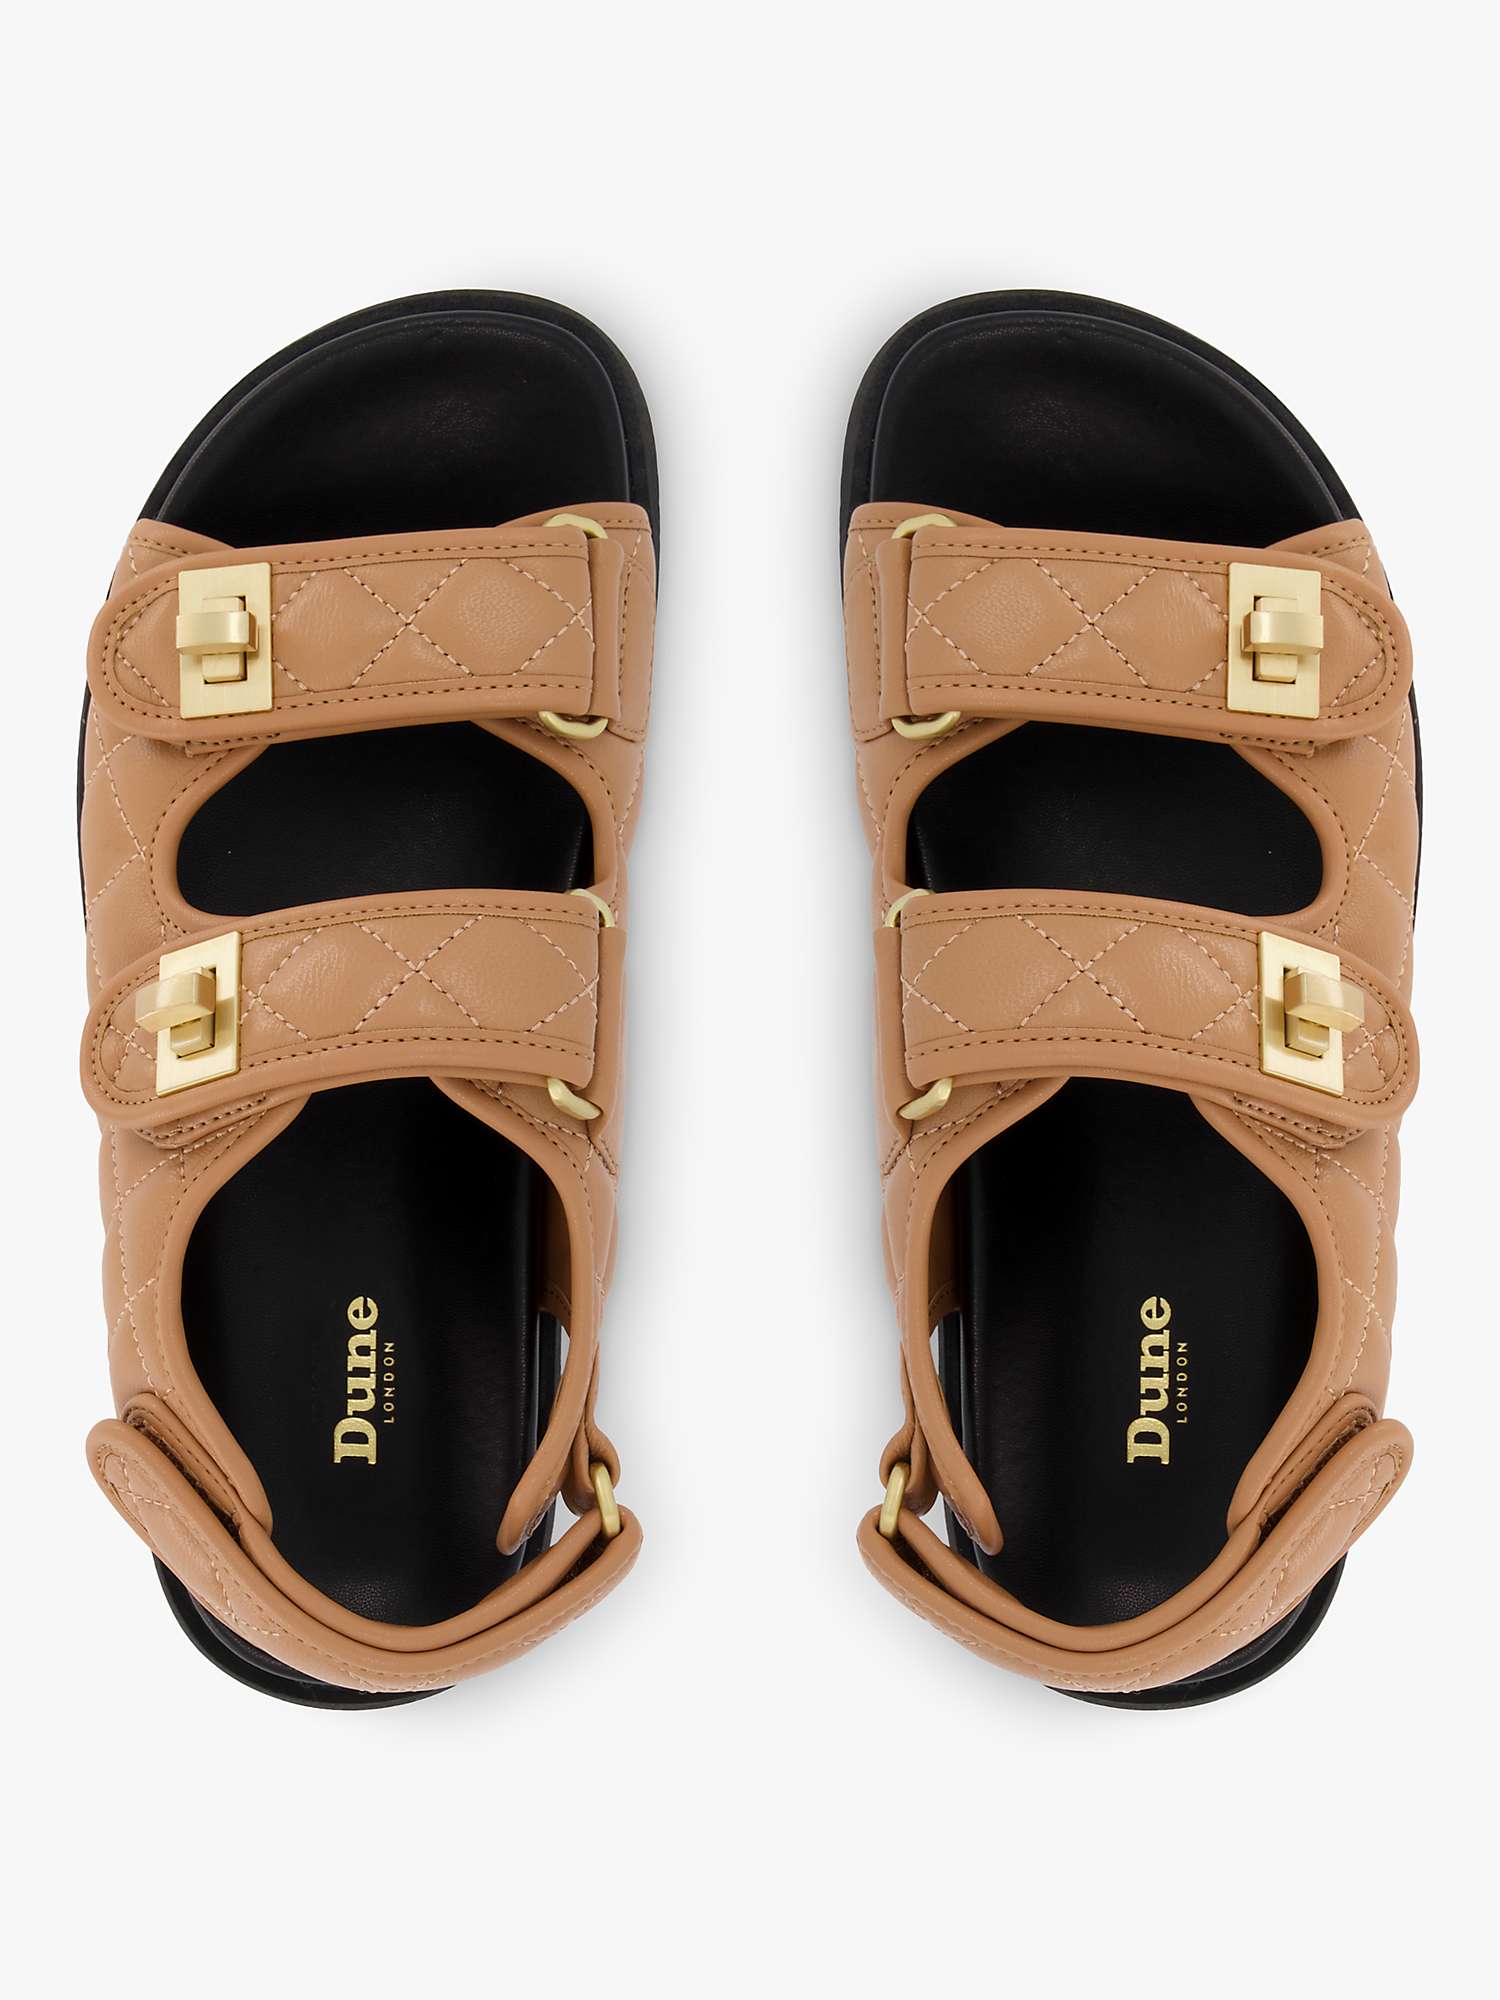 Buy Dune Lockstock Leather Double Strap Sandals Online at johnlewis.com